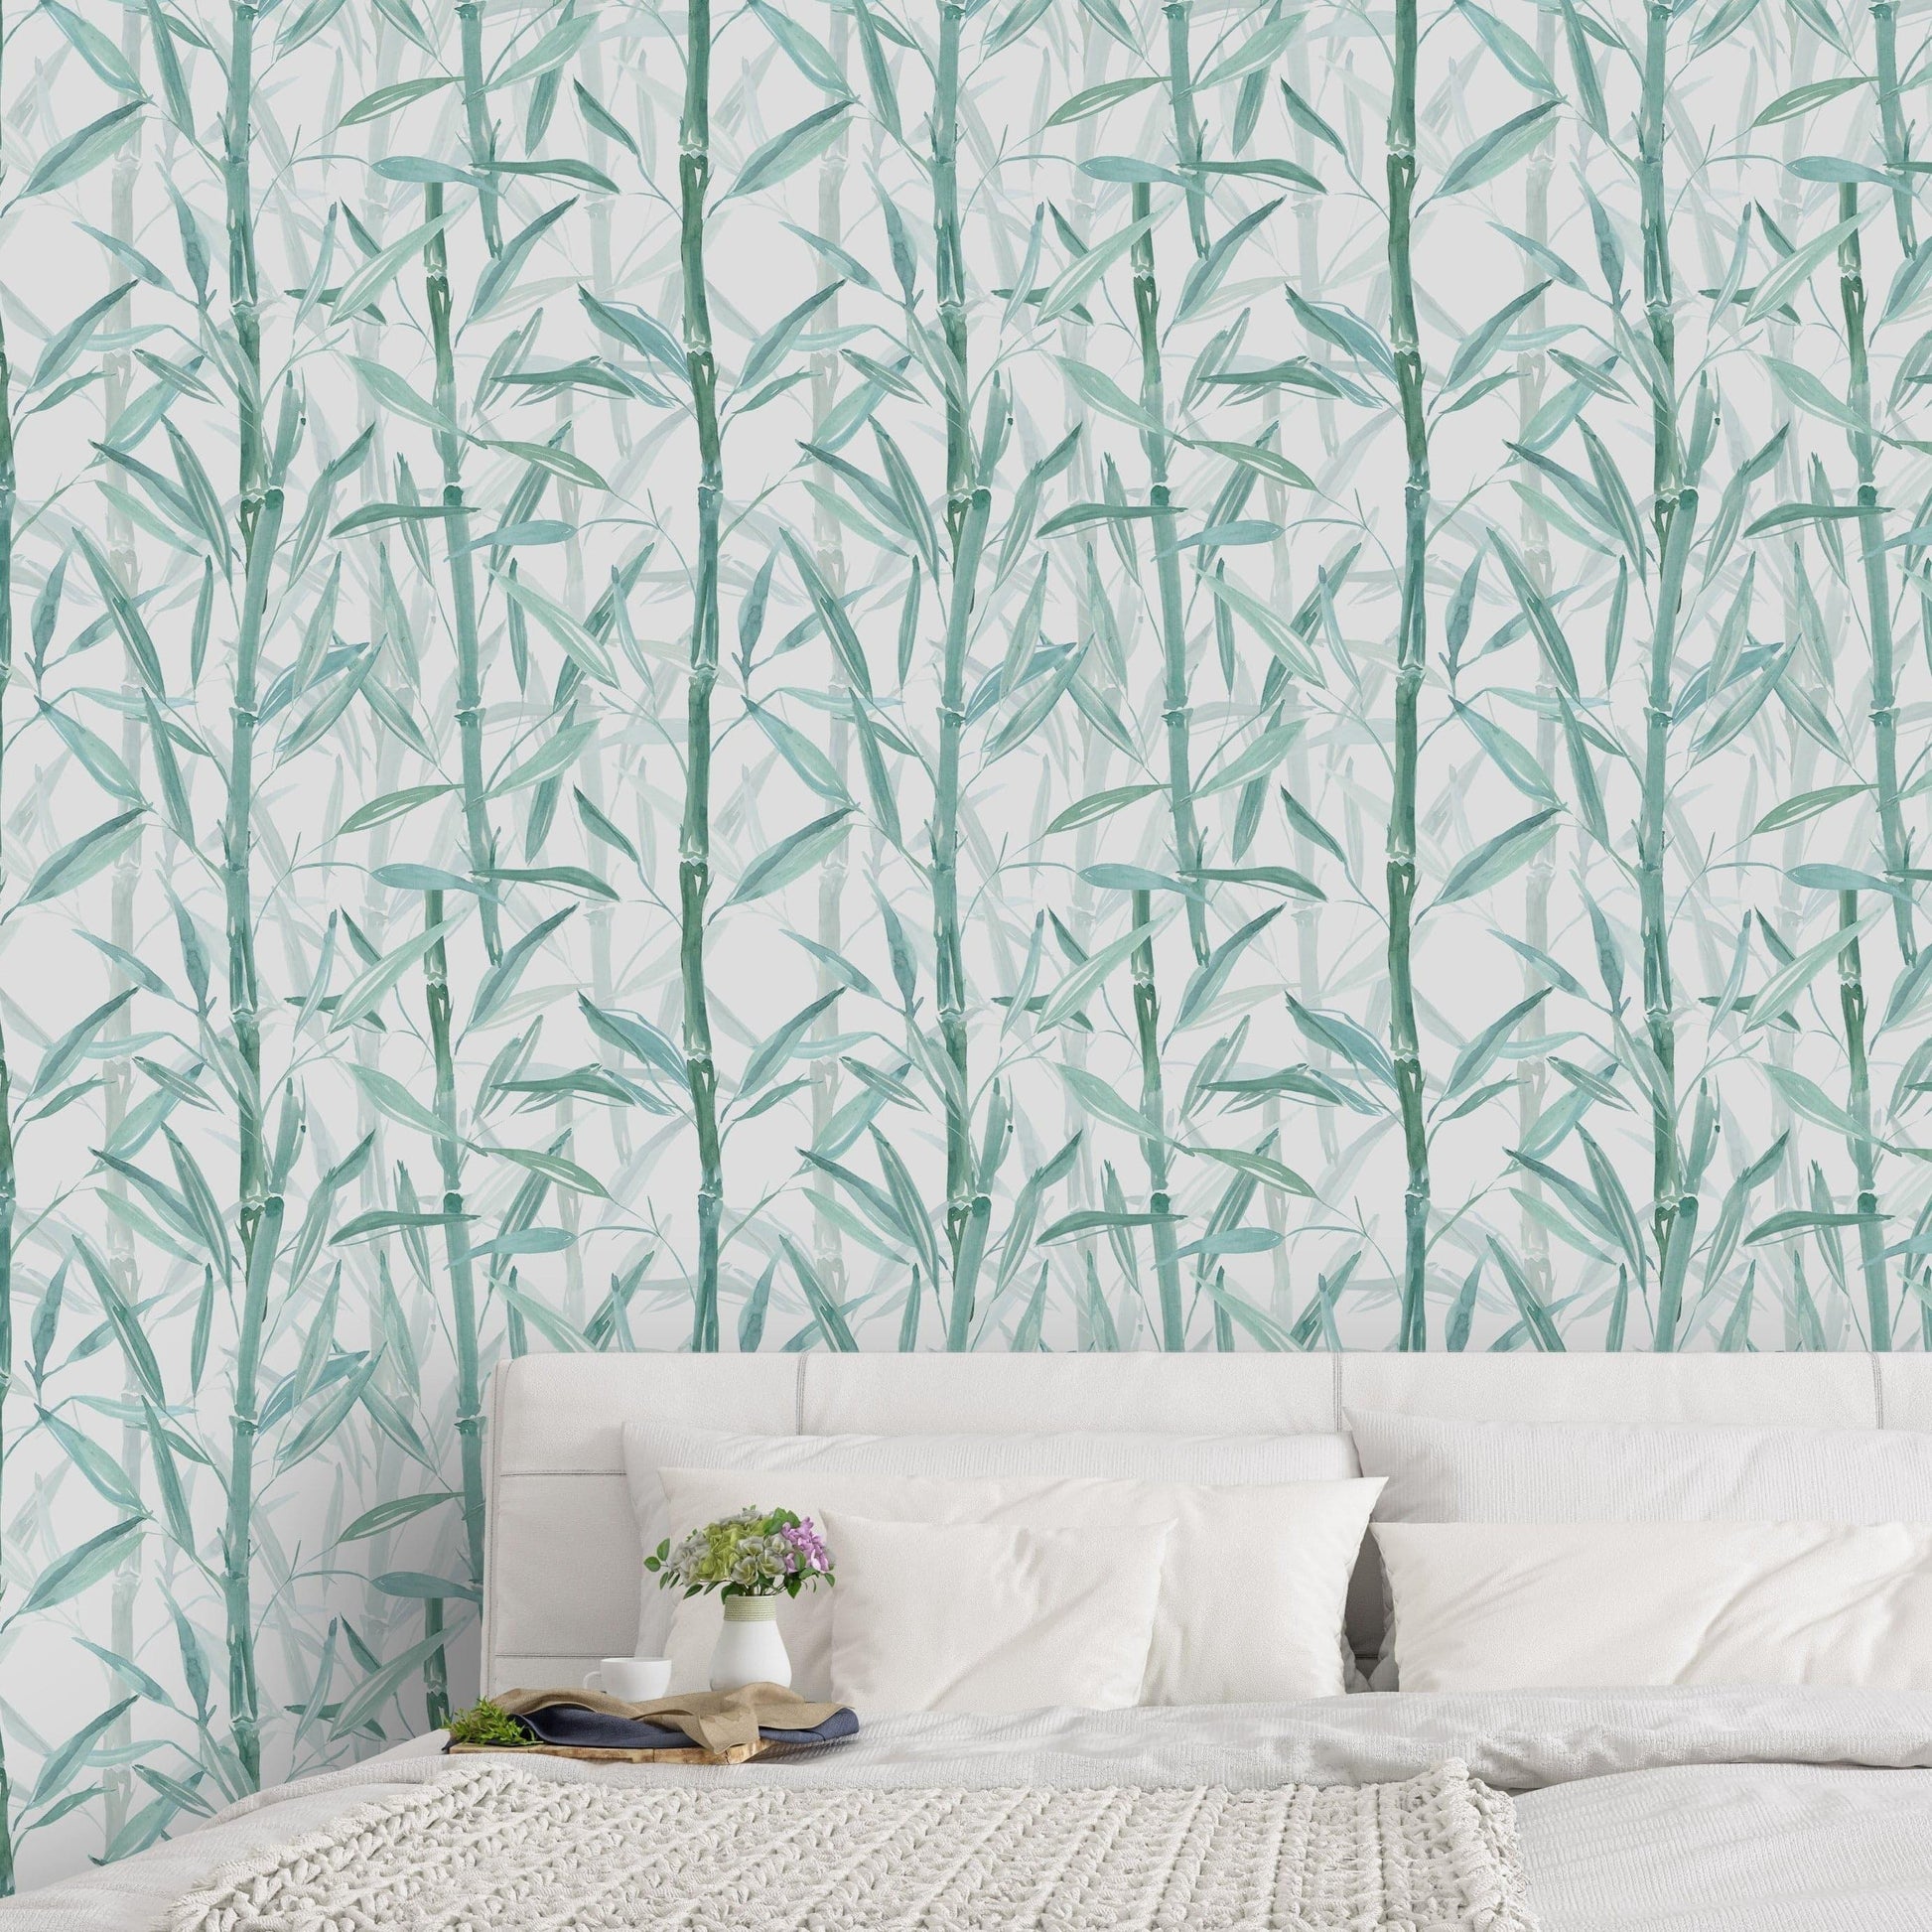 Watercolor Green Bamboo Removable Wallpaper Watercolor Green Bamboo Removable Wallpaper 